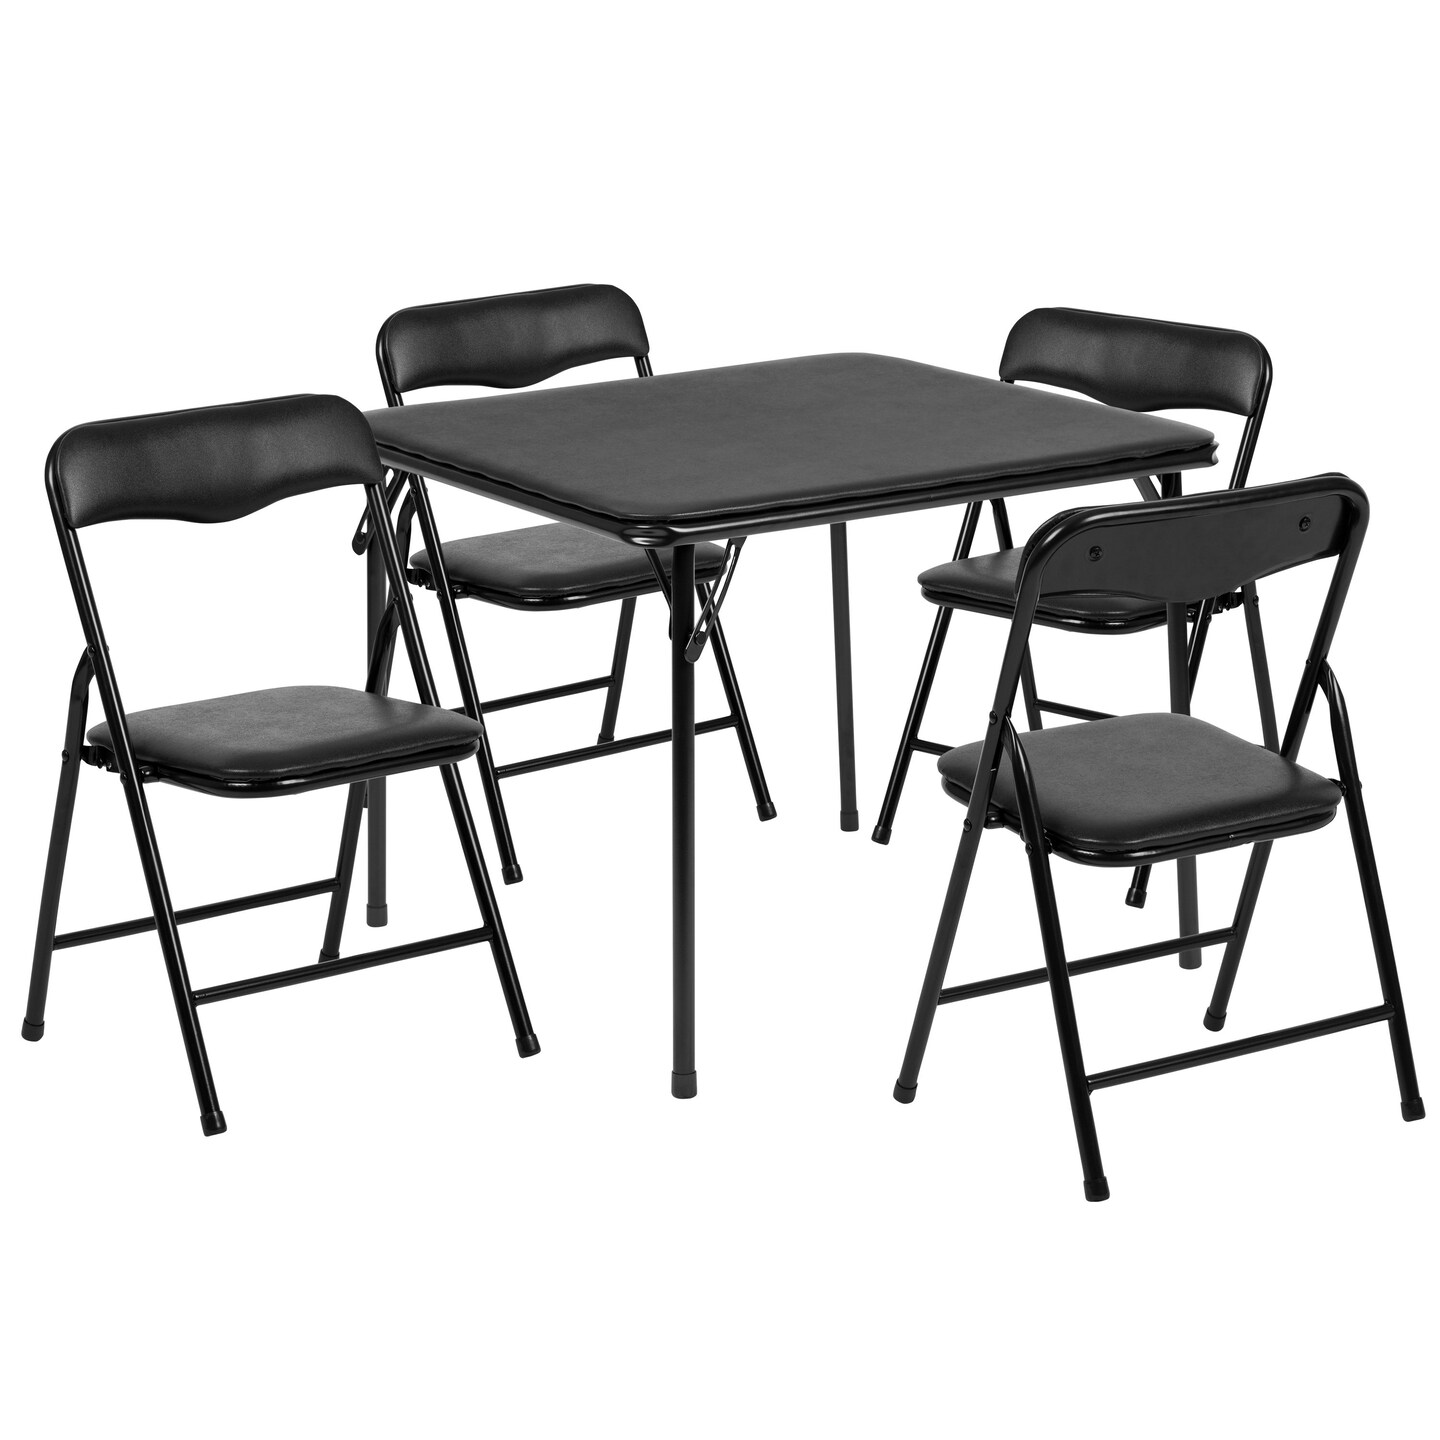 Emma and Oliver Kids 5 Piece Folding Table and Chair Set - Kids Activity Table Set